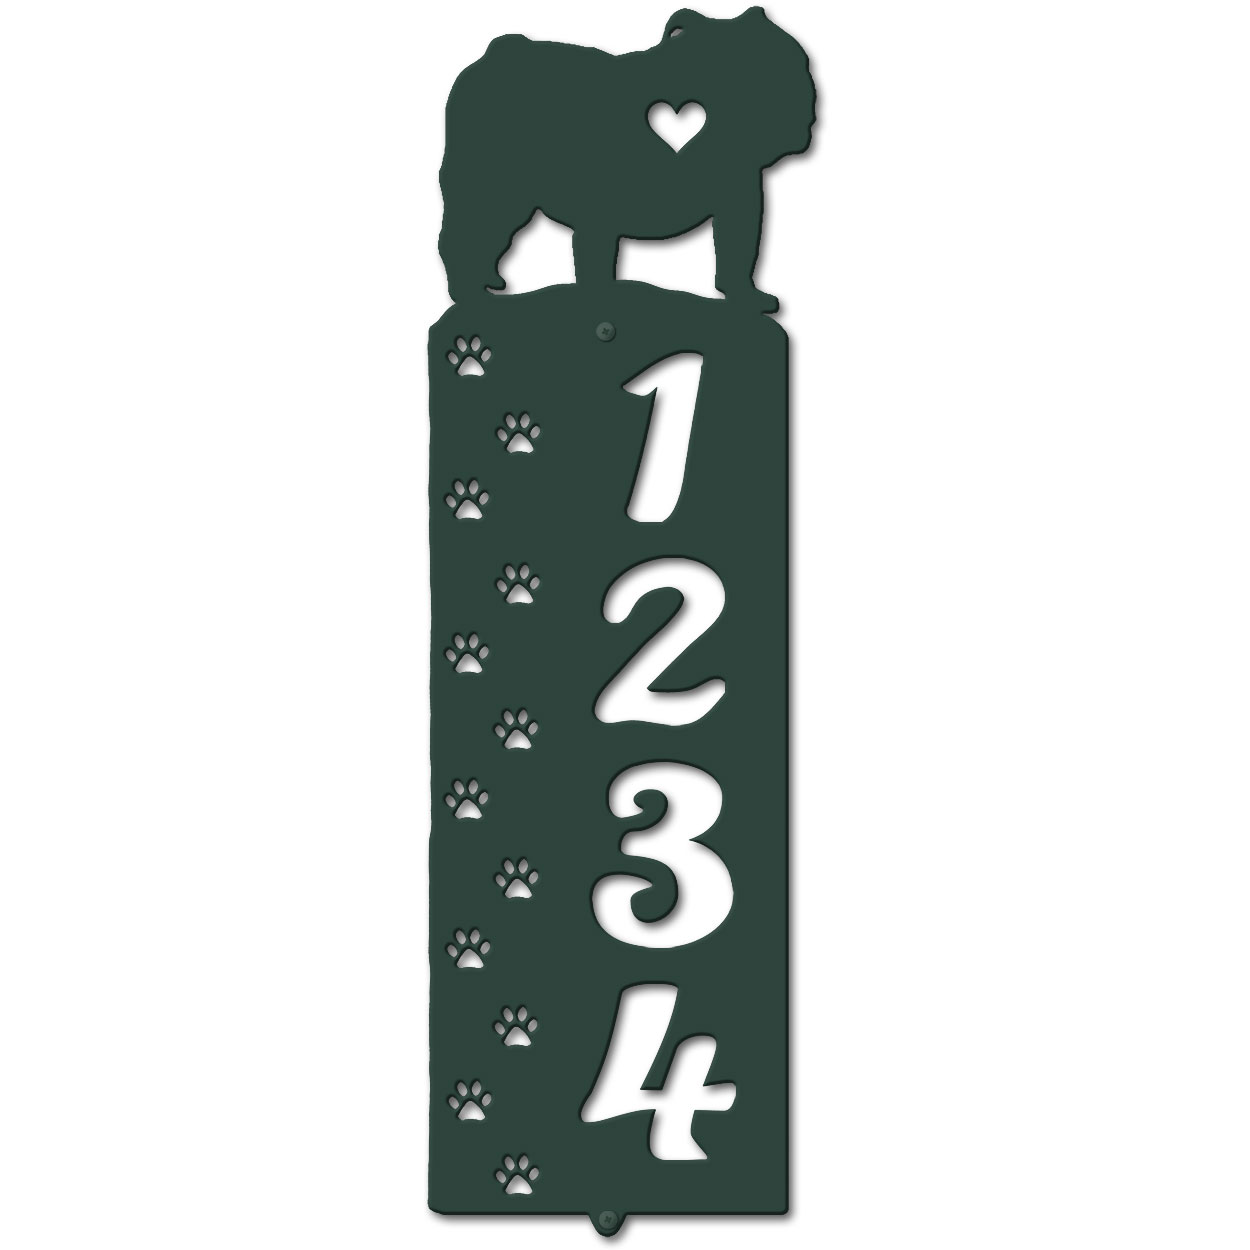 636204 - English Bulldog Cut-Outs Four Digit Address Number Plaque - Choose Size and Color